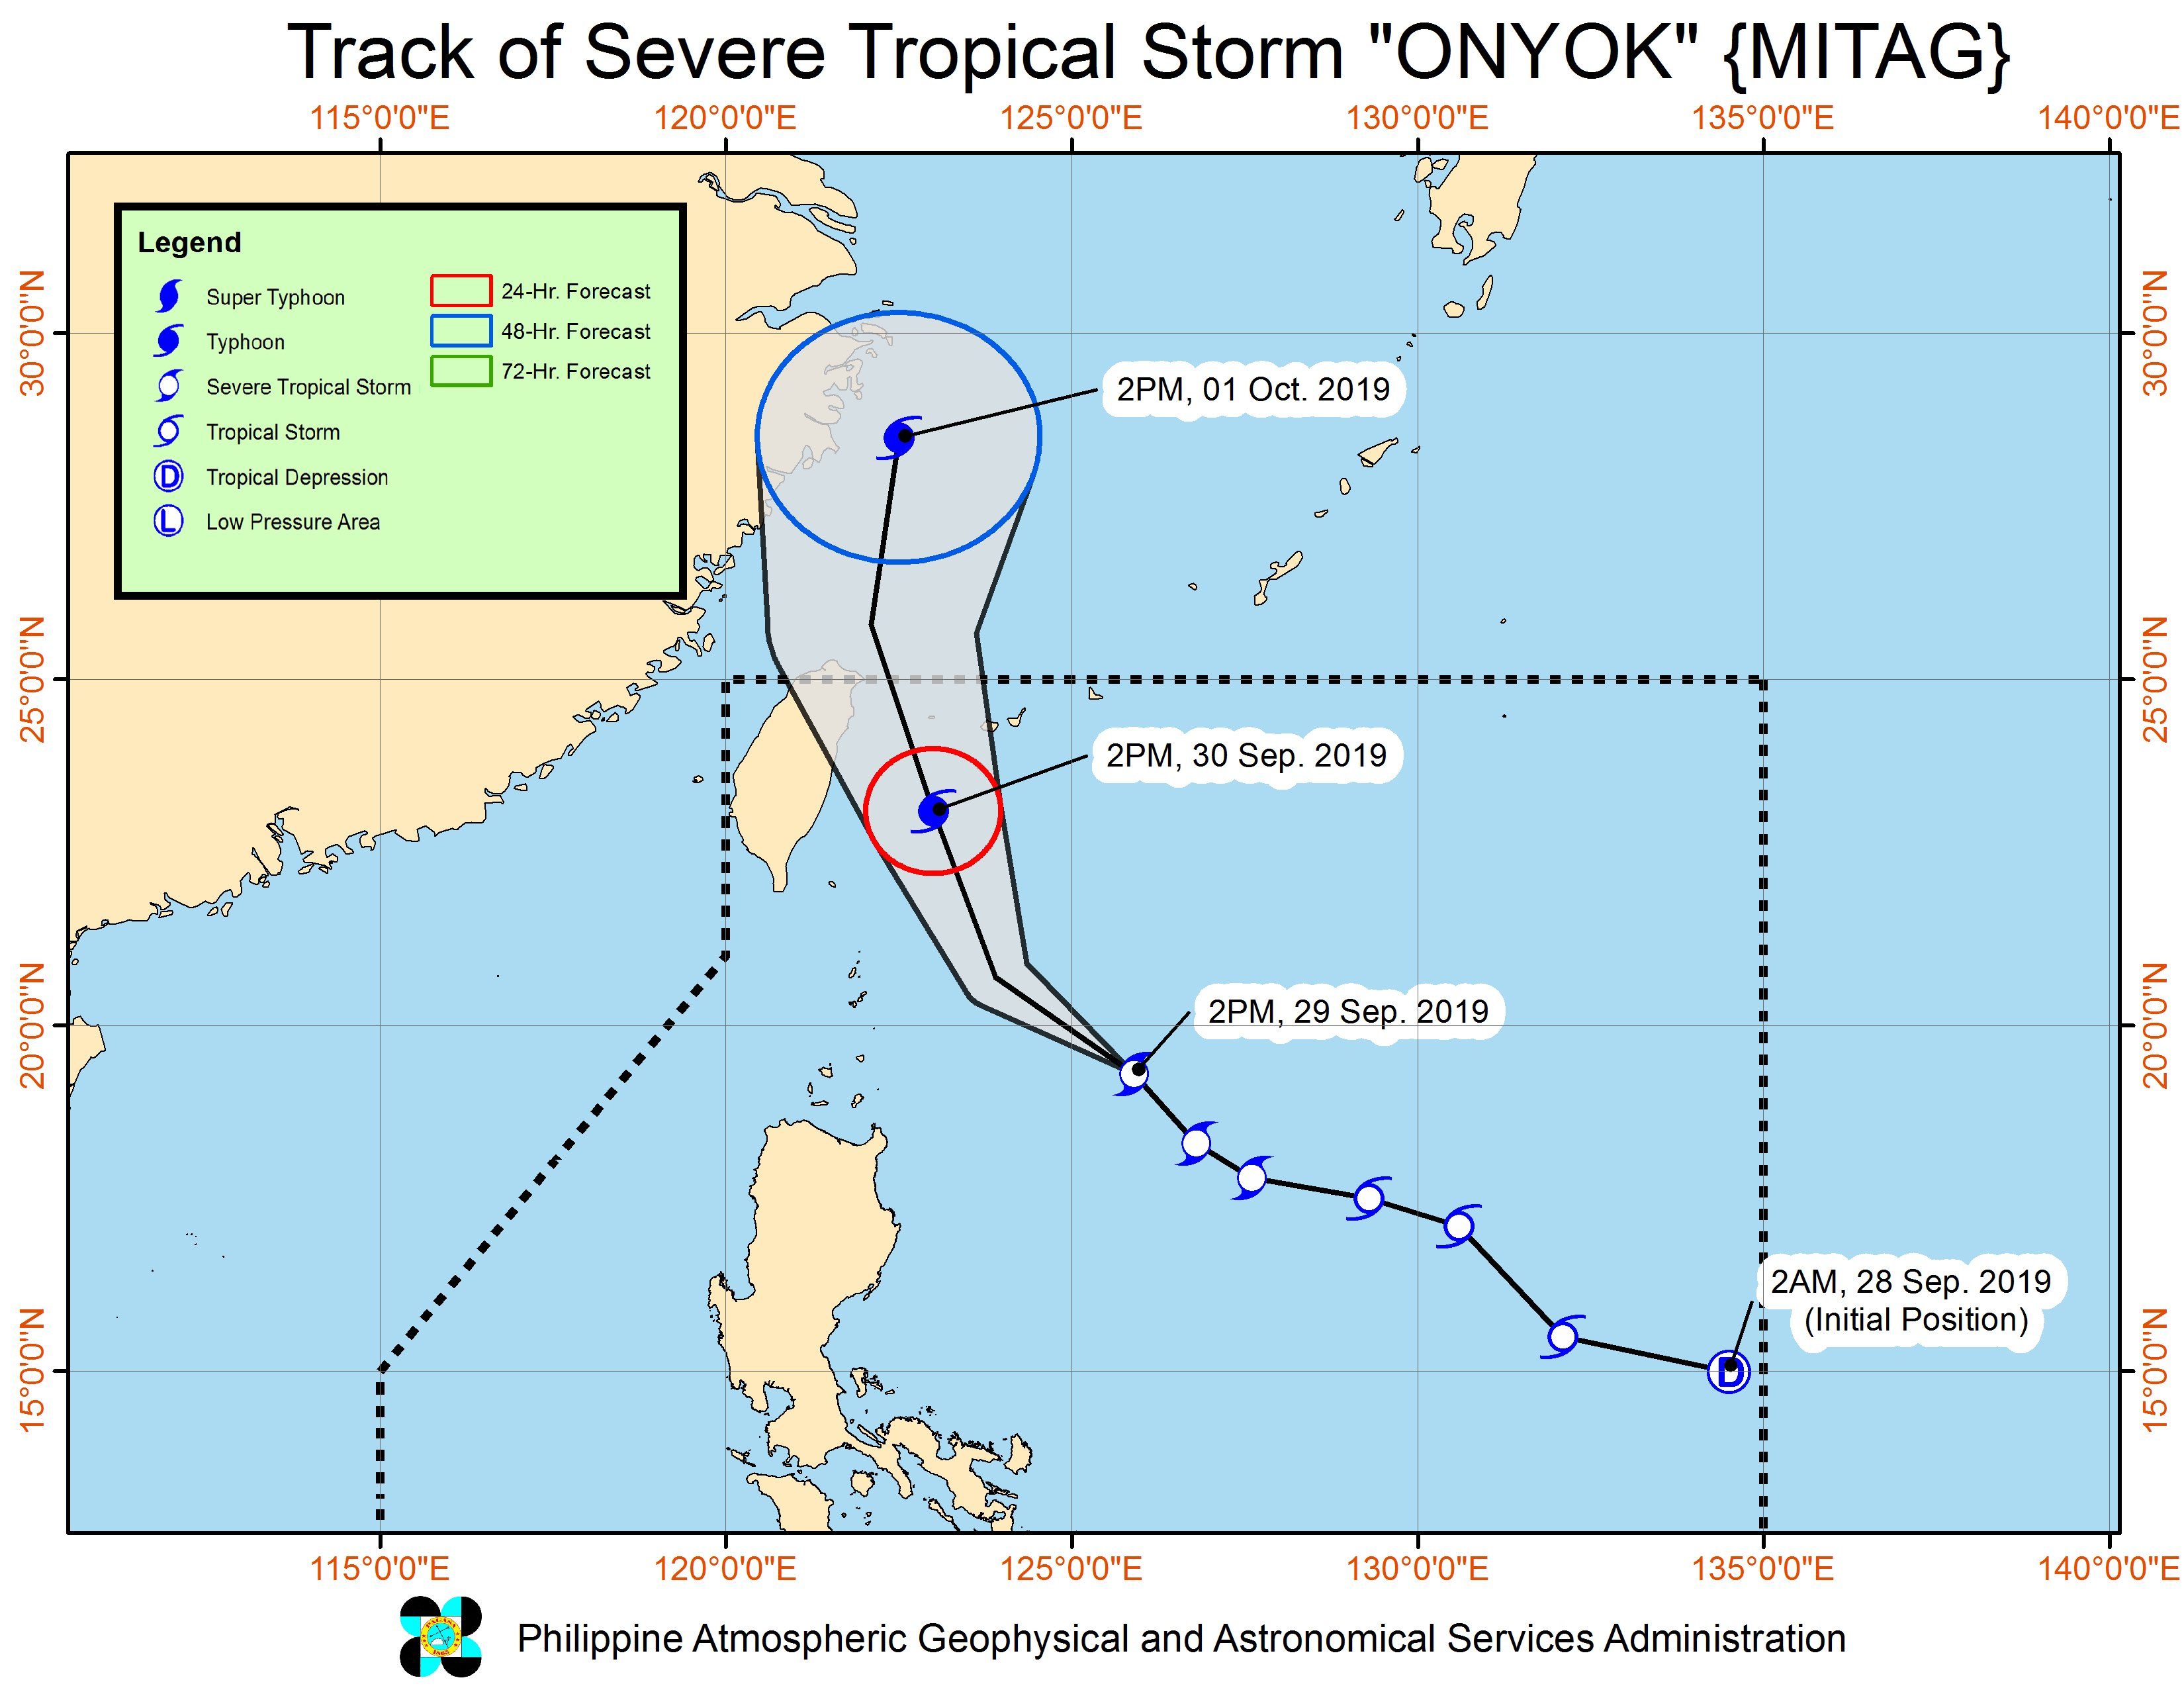 Forecast track of Severe Tropical Storm Onyok (Mitag) as of September 29, 2019, 5 pm. Image from PAGASA 